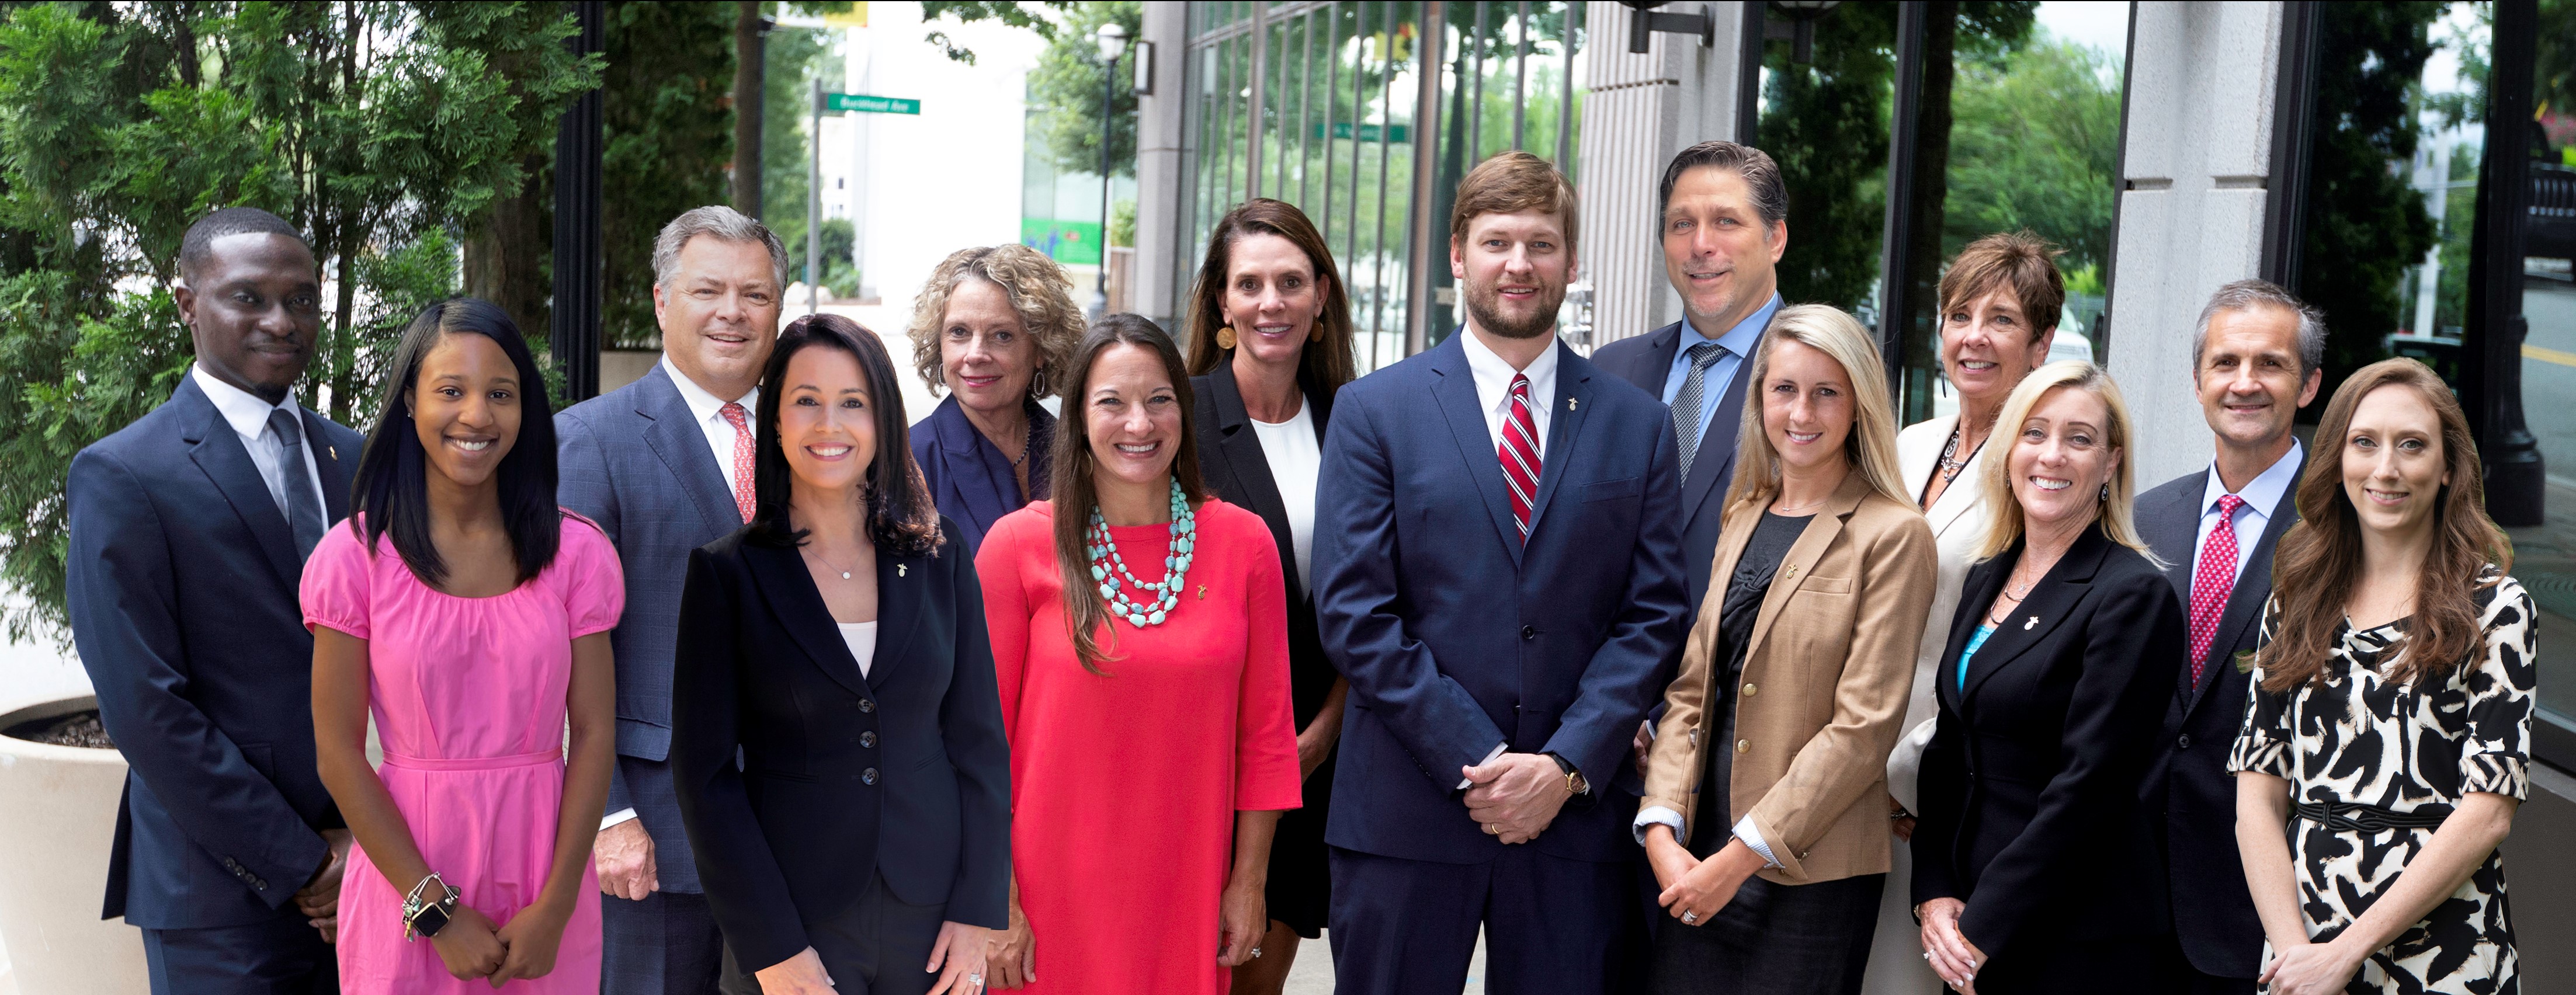 Group photo of Atlanta Southern First bankers.